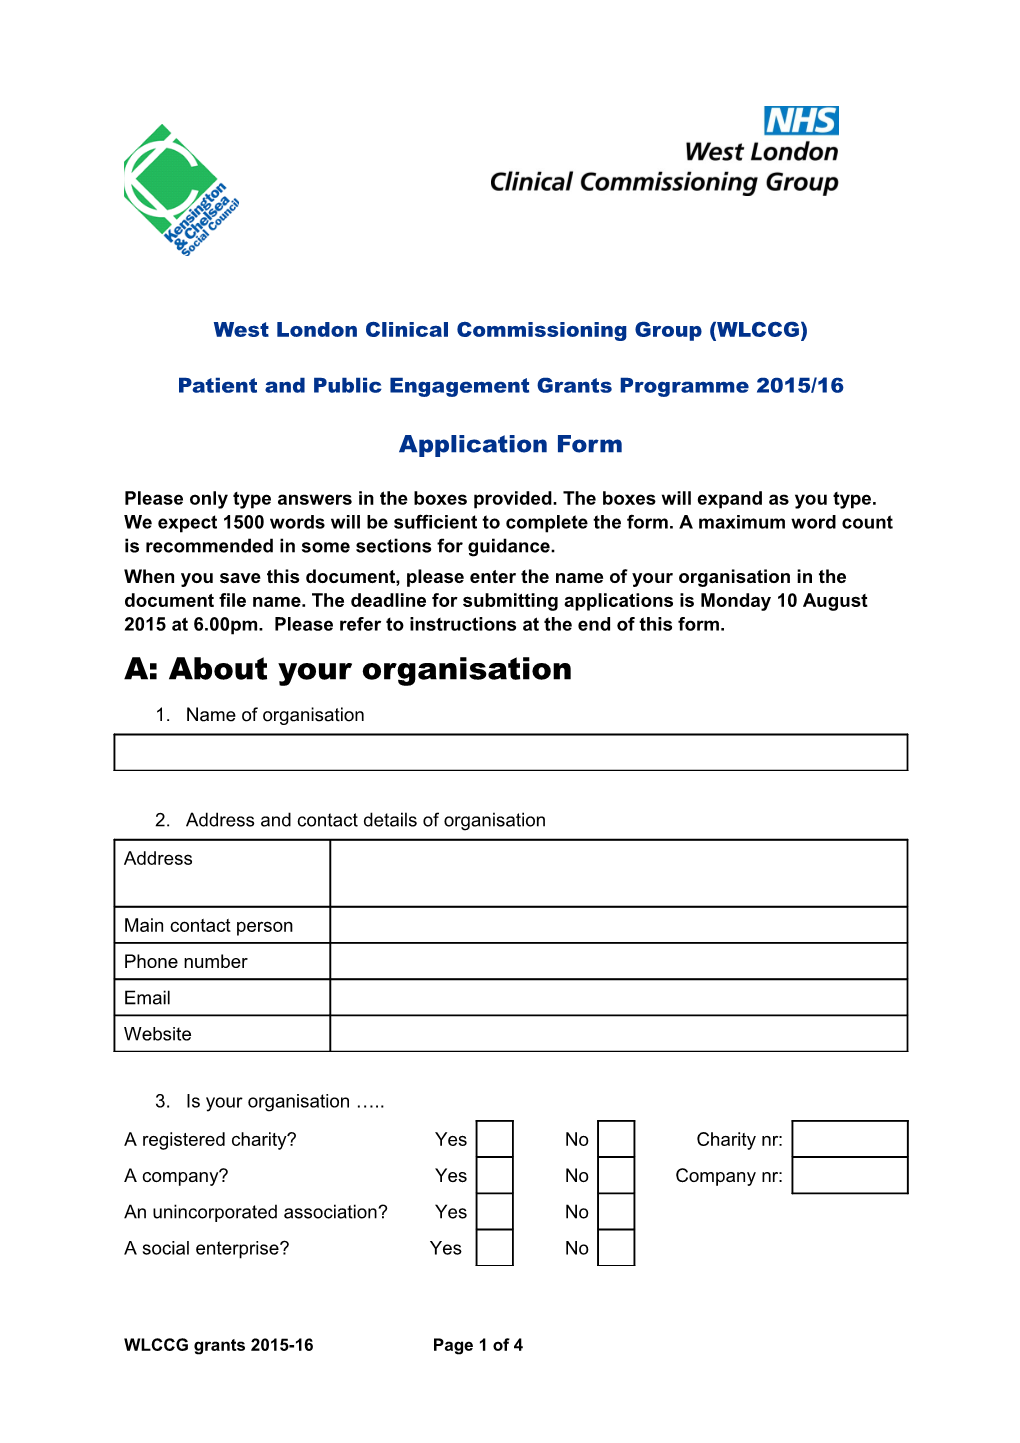 West London Clinical Commissioning Group (WLCCG)